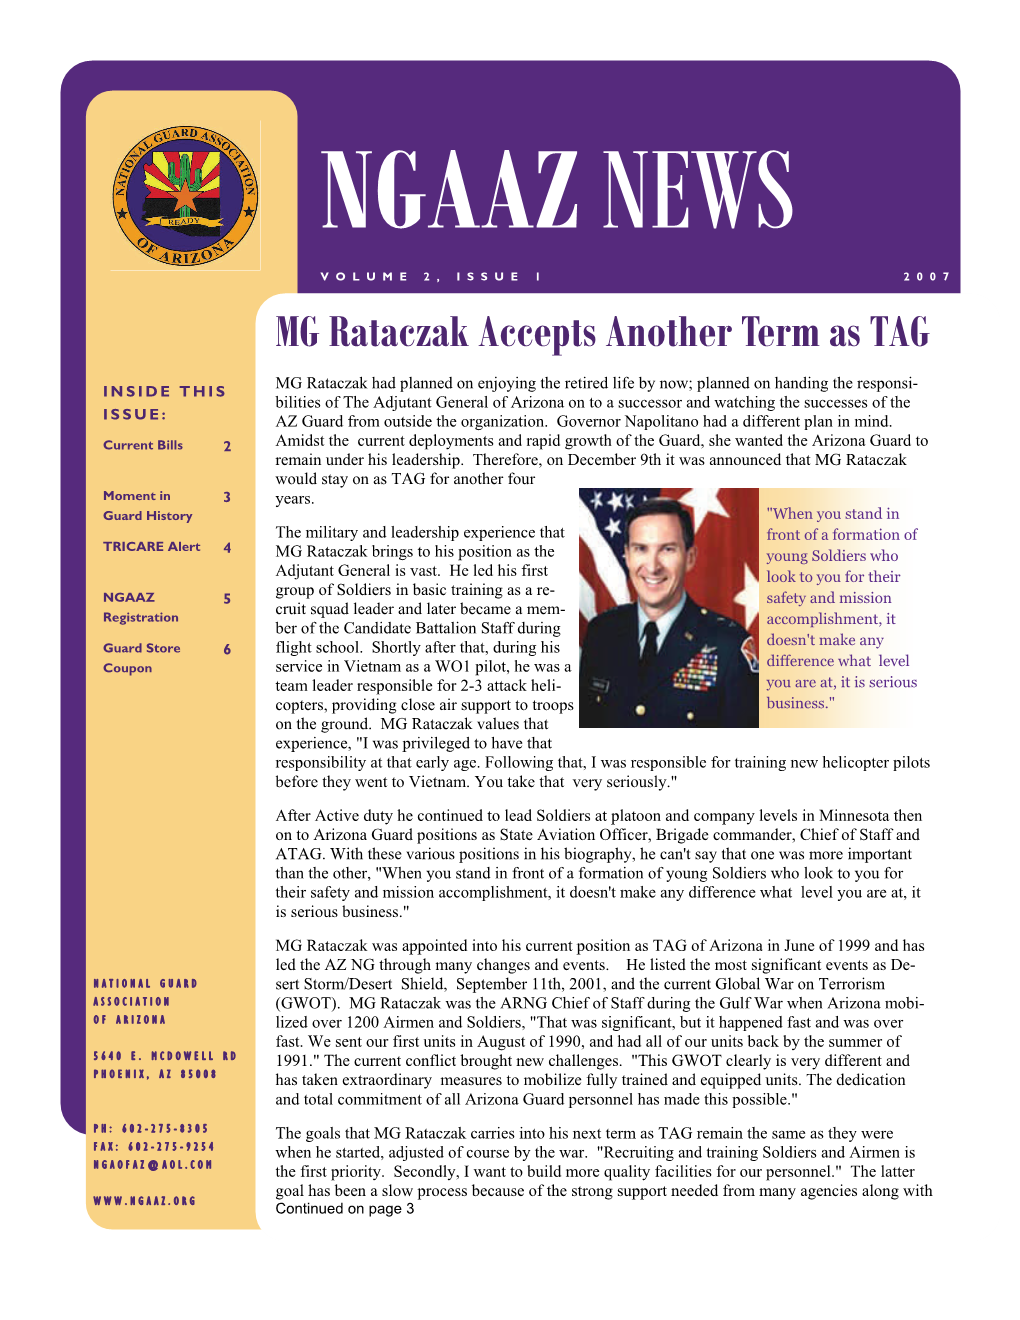 MG Rataczak Accepts Another Term As TAG